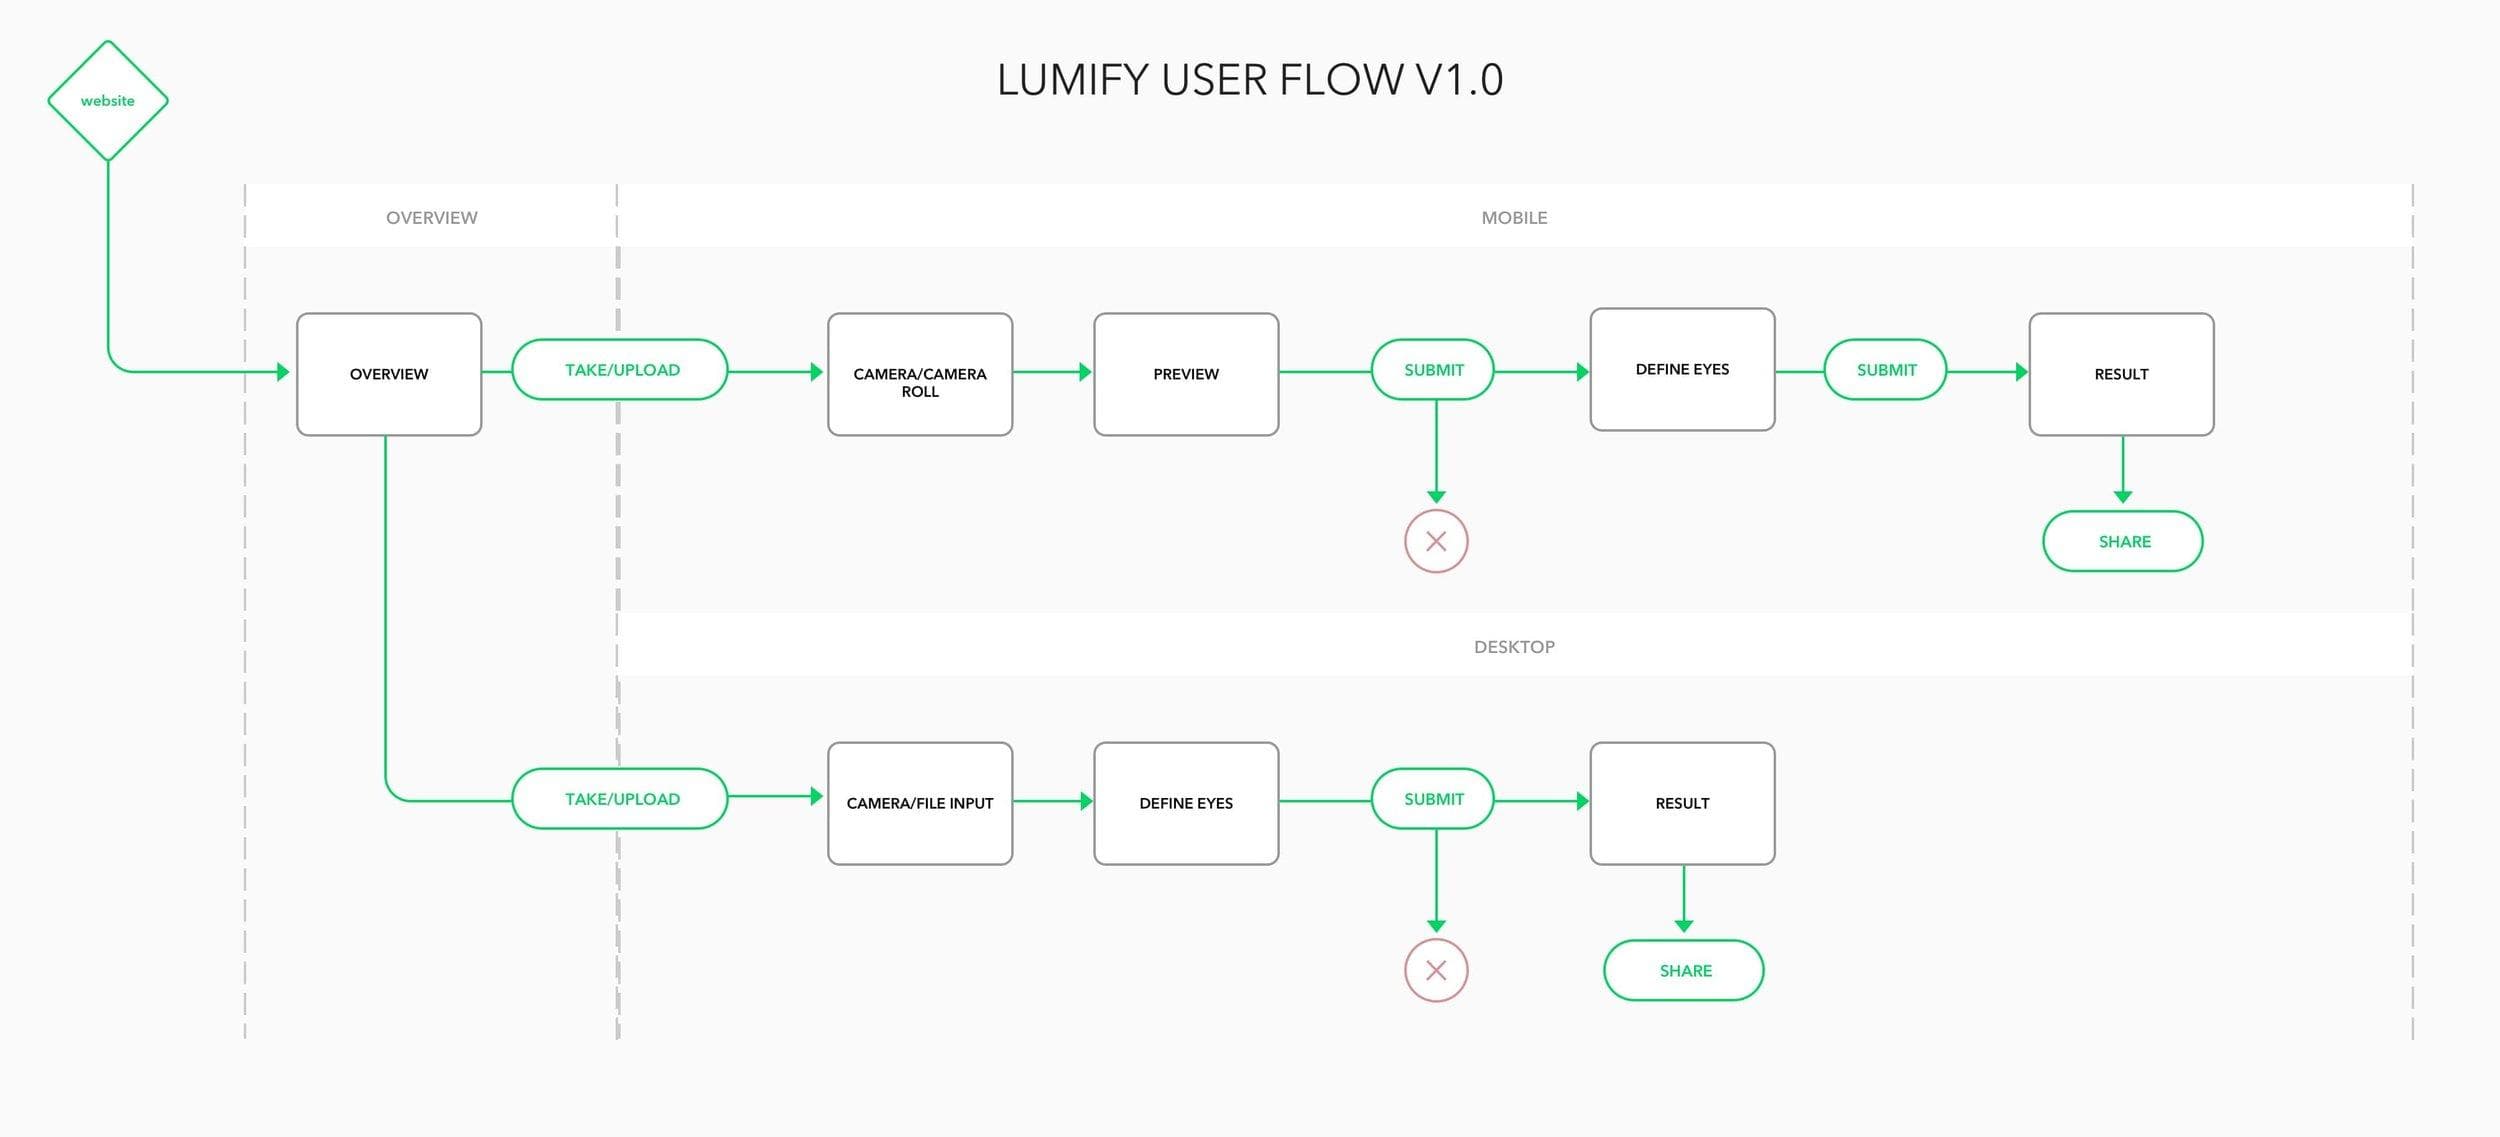 Lumify user flow